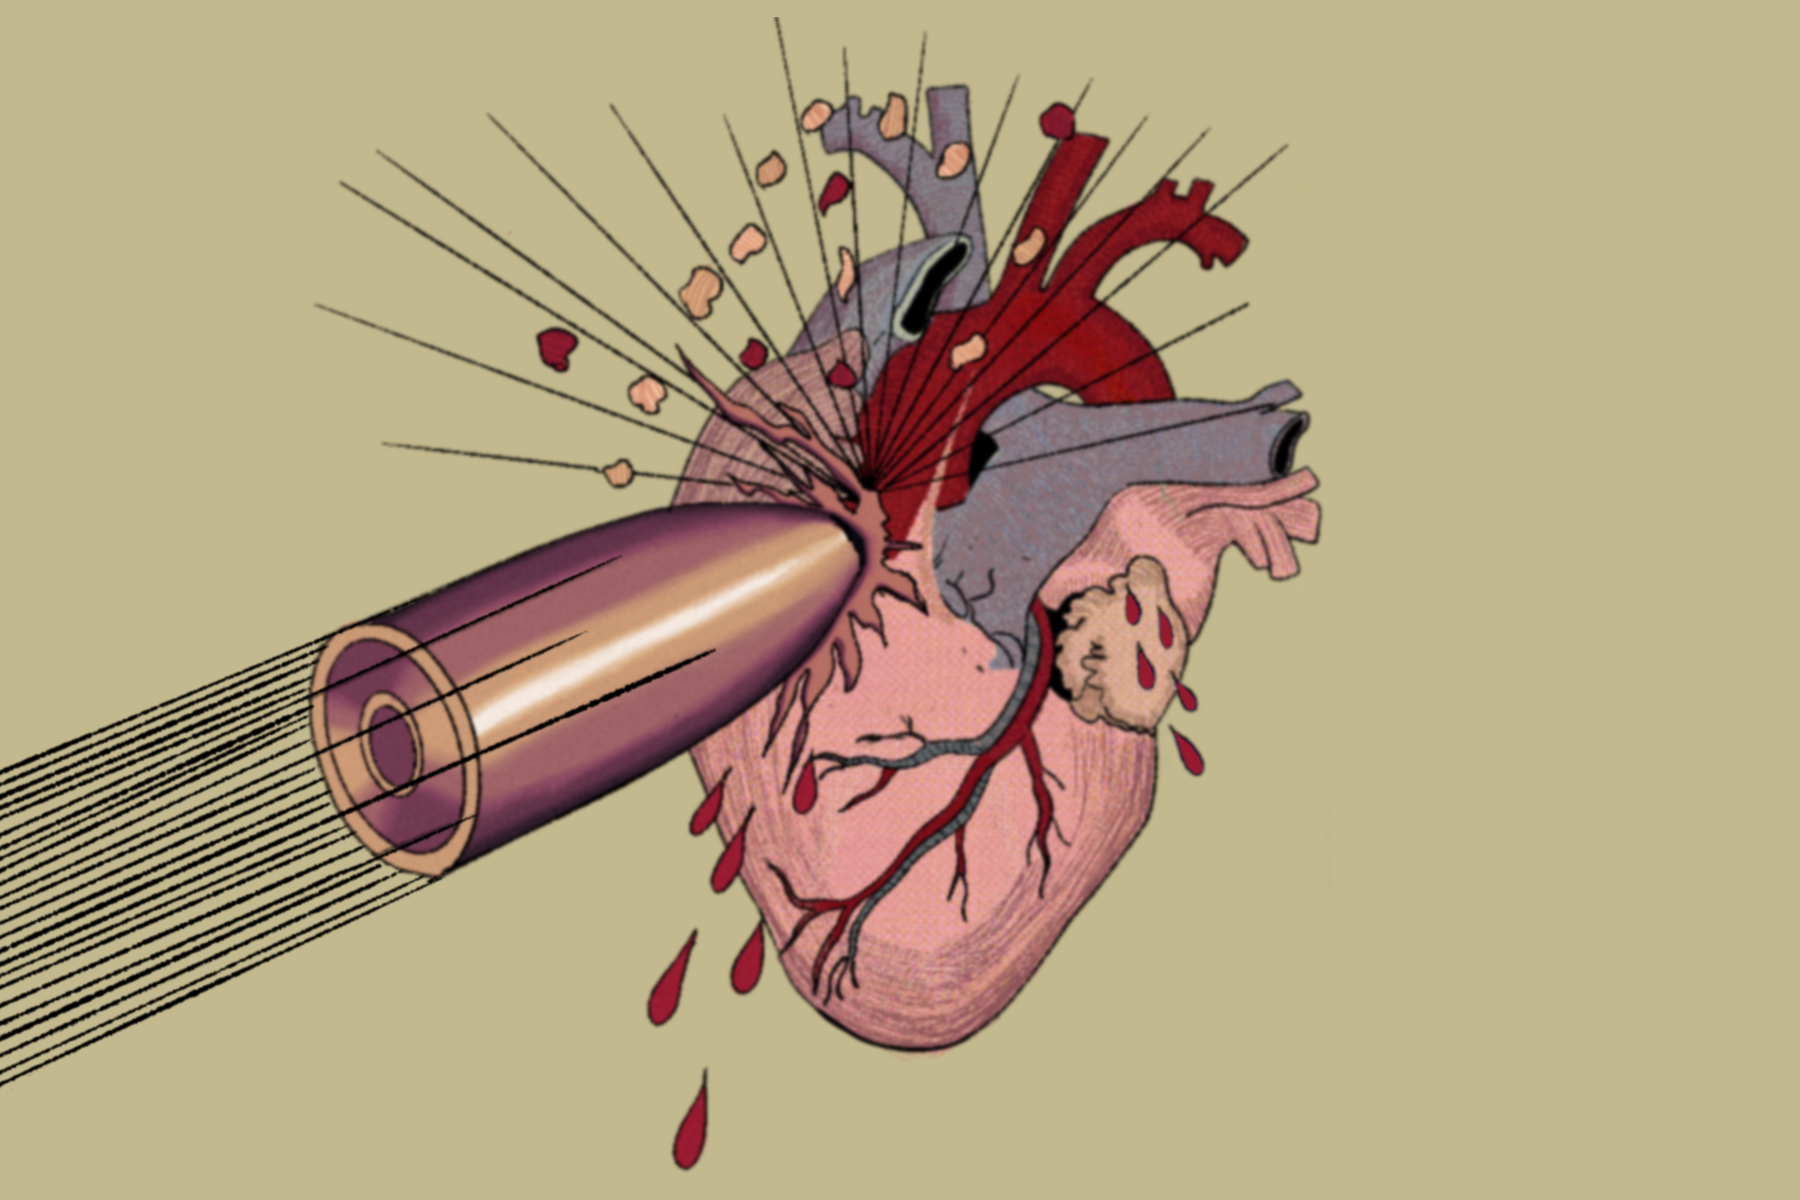 Featured image: On a tan backdrop, a bullet pierces a heart, drops of blood falling and action lines radiate out from the point of impact. Illustration by Sammi Crowley.